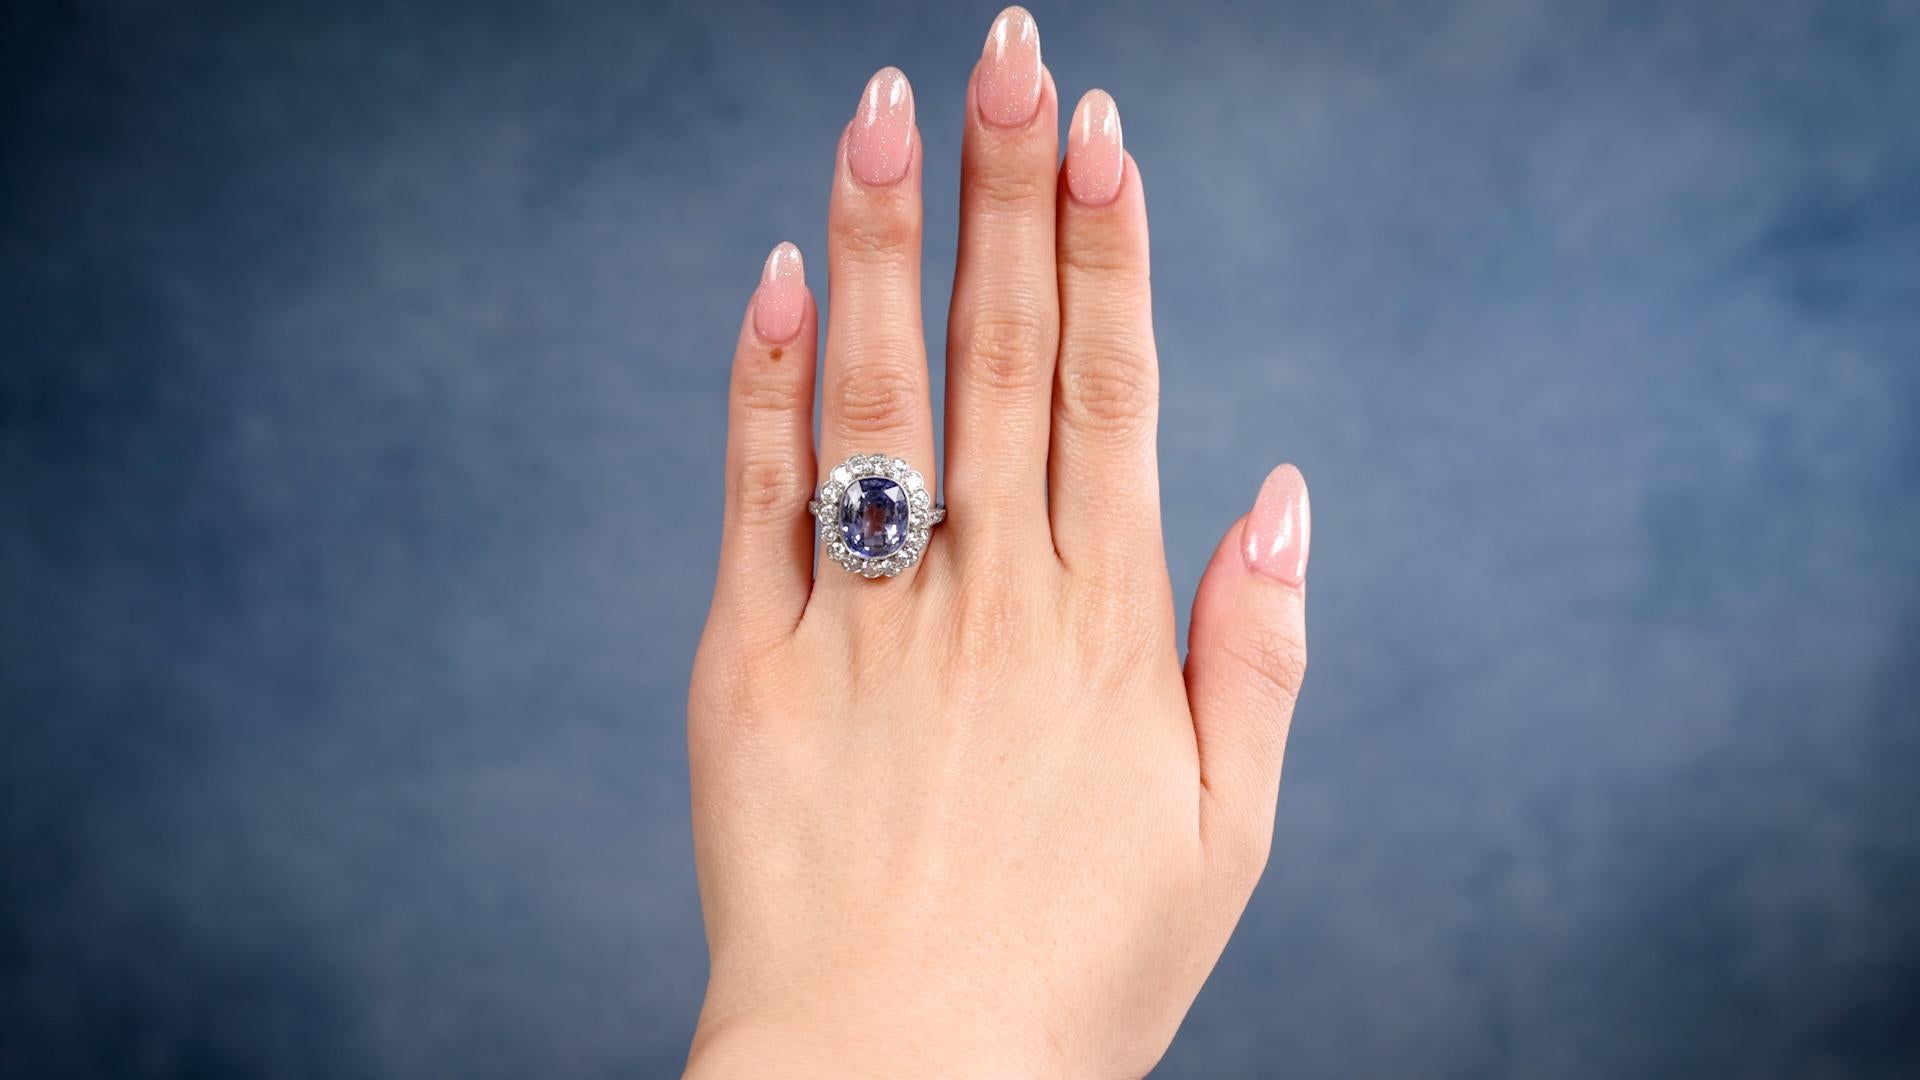 One Art Deco Inspired Sapphire and Diamond Platinum Ring. Featuring one cushion cut sapphire weighing approximately 6.00 carats. Accented by 22 round brilliant cut diamonds with a total weight of approximately 1.40 carats, graded near-colorless, VS